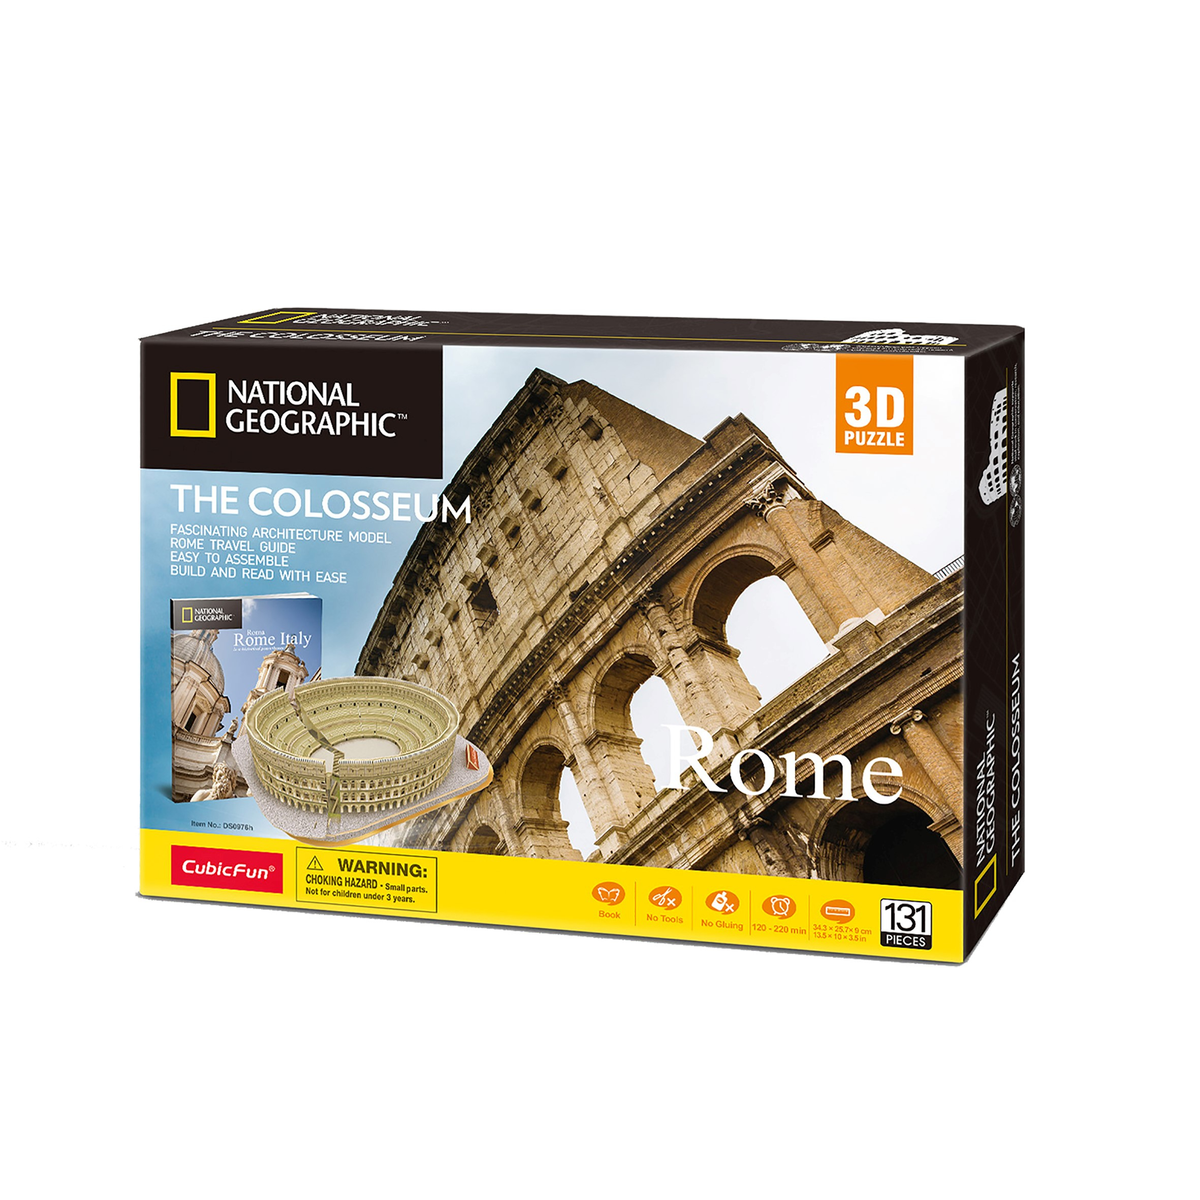 NATIONAL GEOGRAPHIC The Colosseum Puzzle